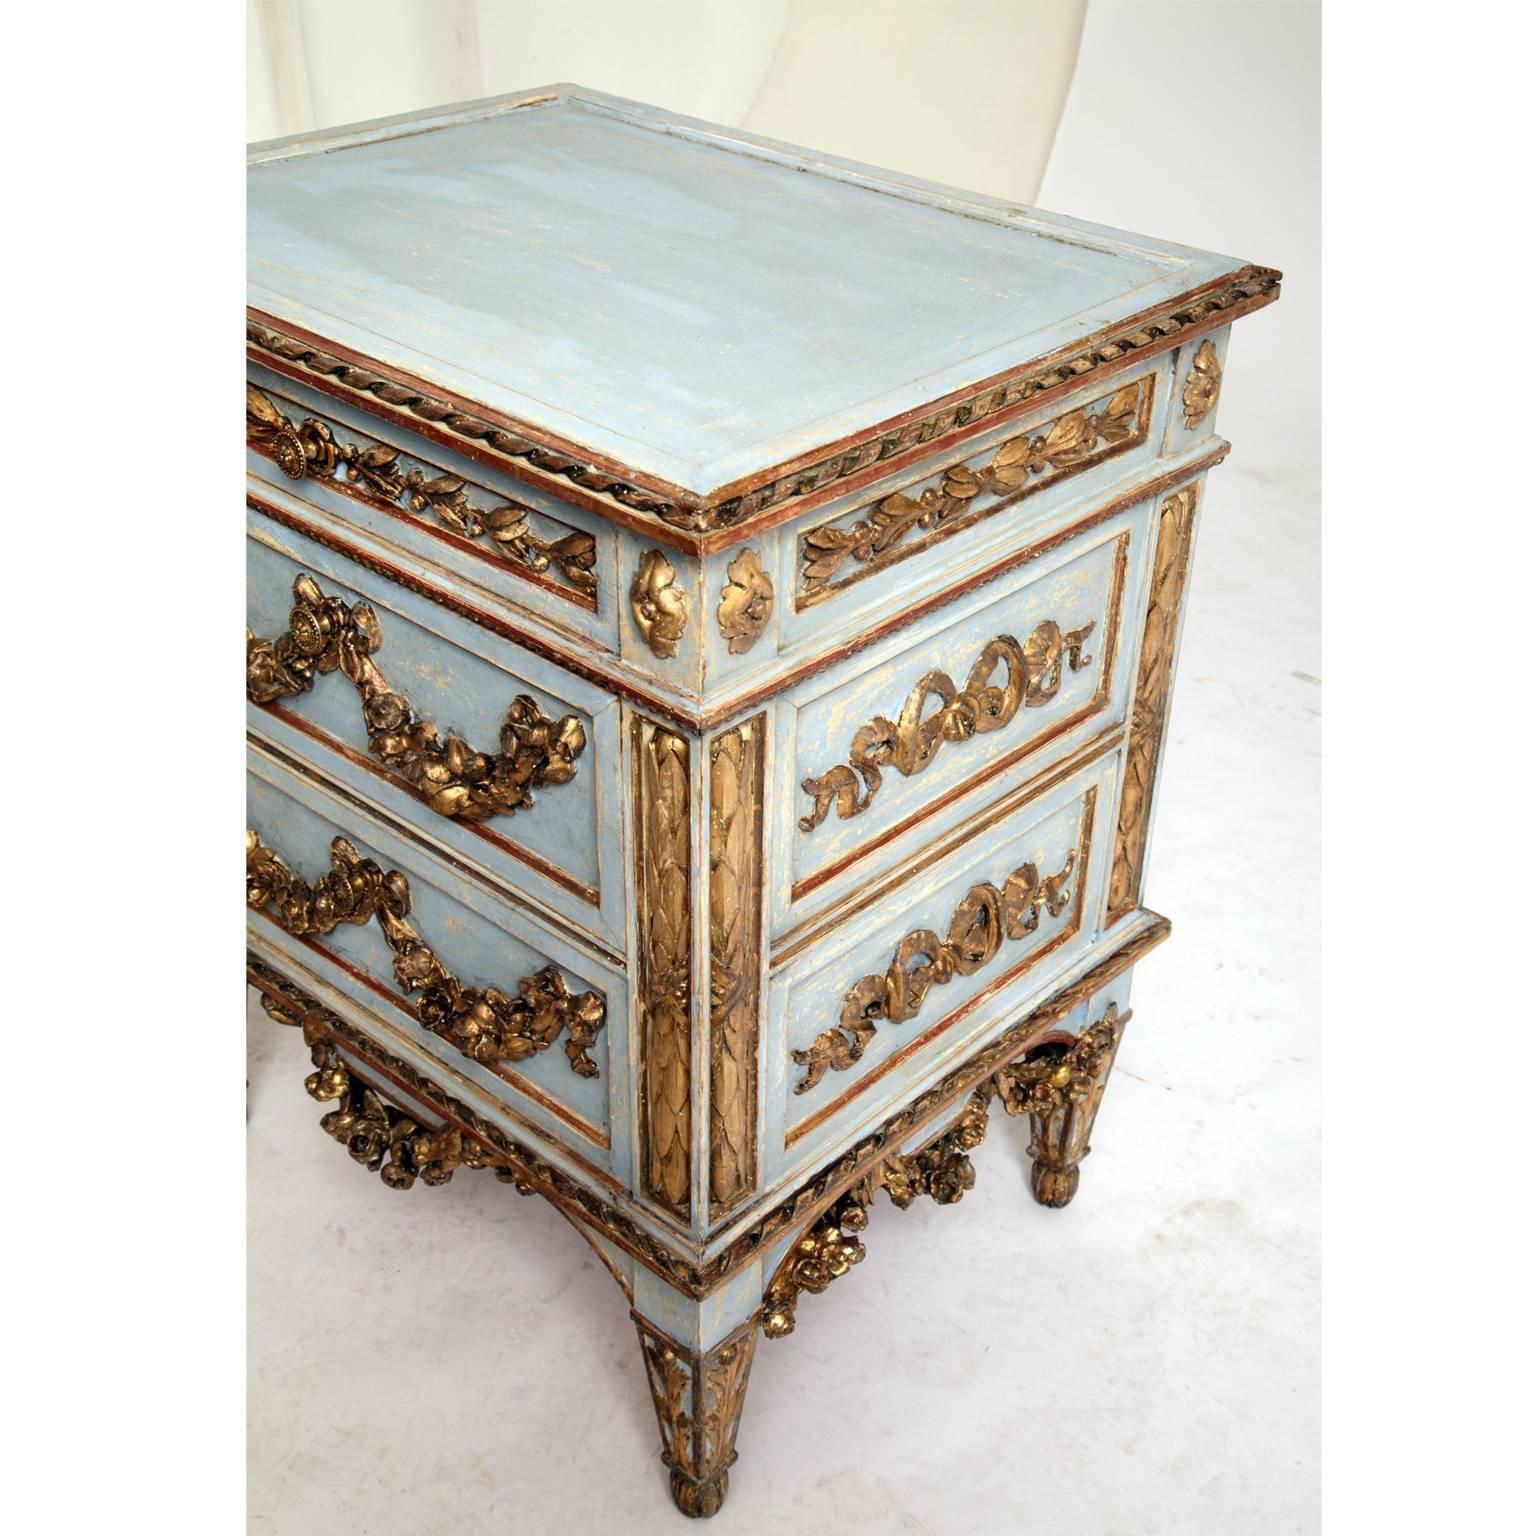 European Louis Seize Style Chest of Drawers, Second Half of the 19th Century